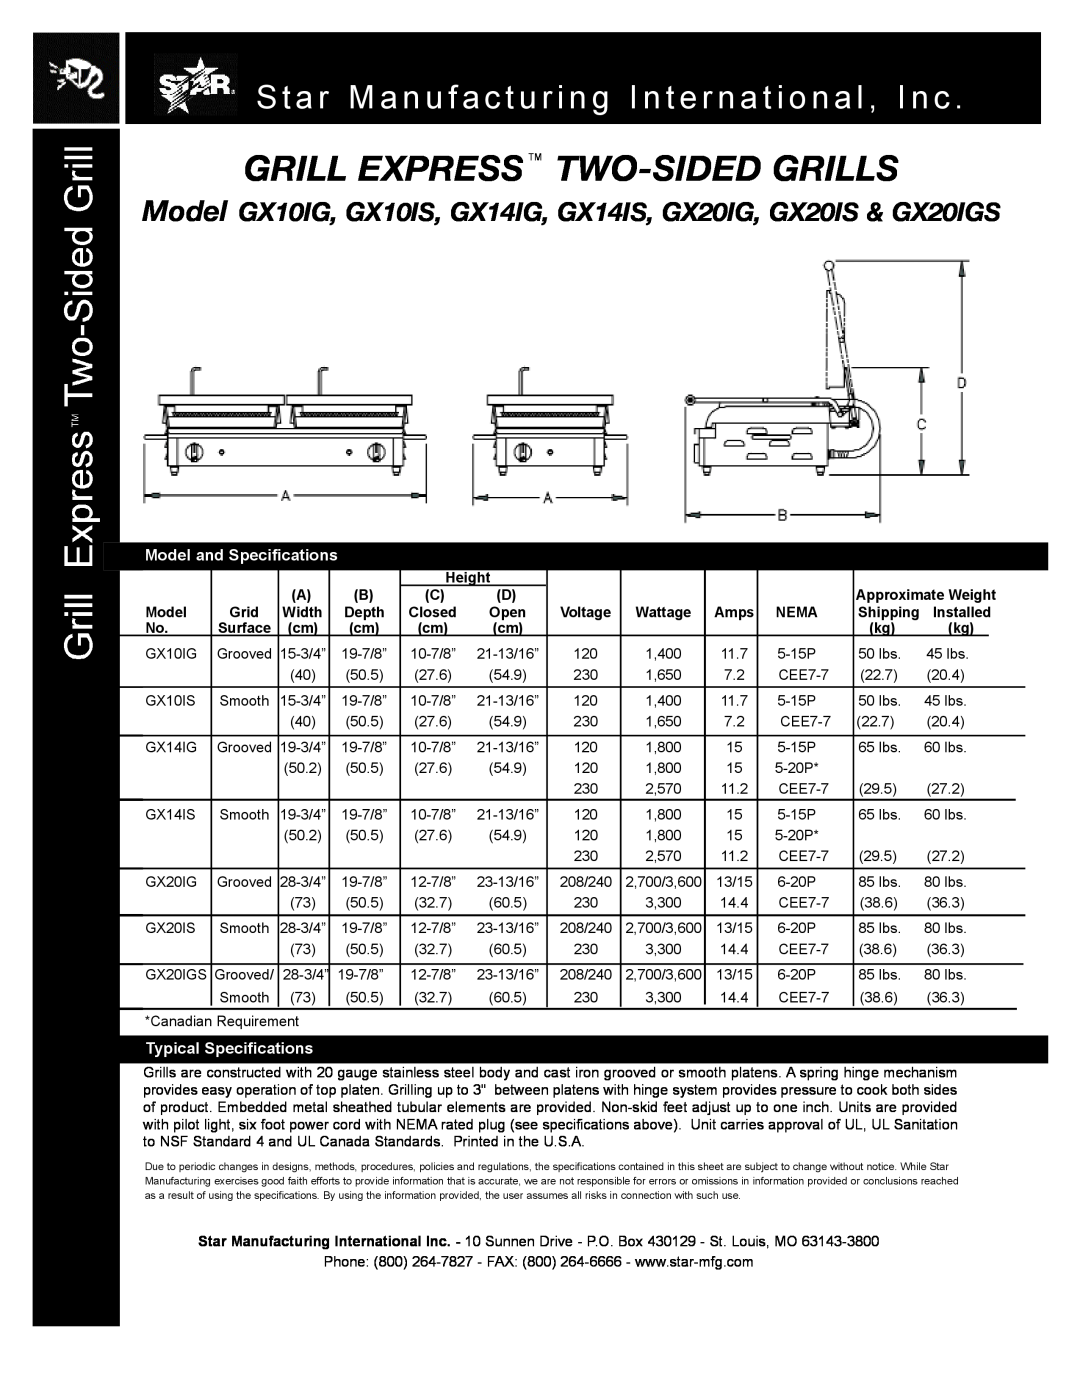 Star Manufacturing GX10IS Grill Express Tm Two-Sided Grills, Star Manufacturing International, Inc, Typical Specifications 